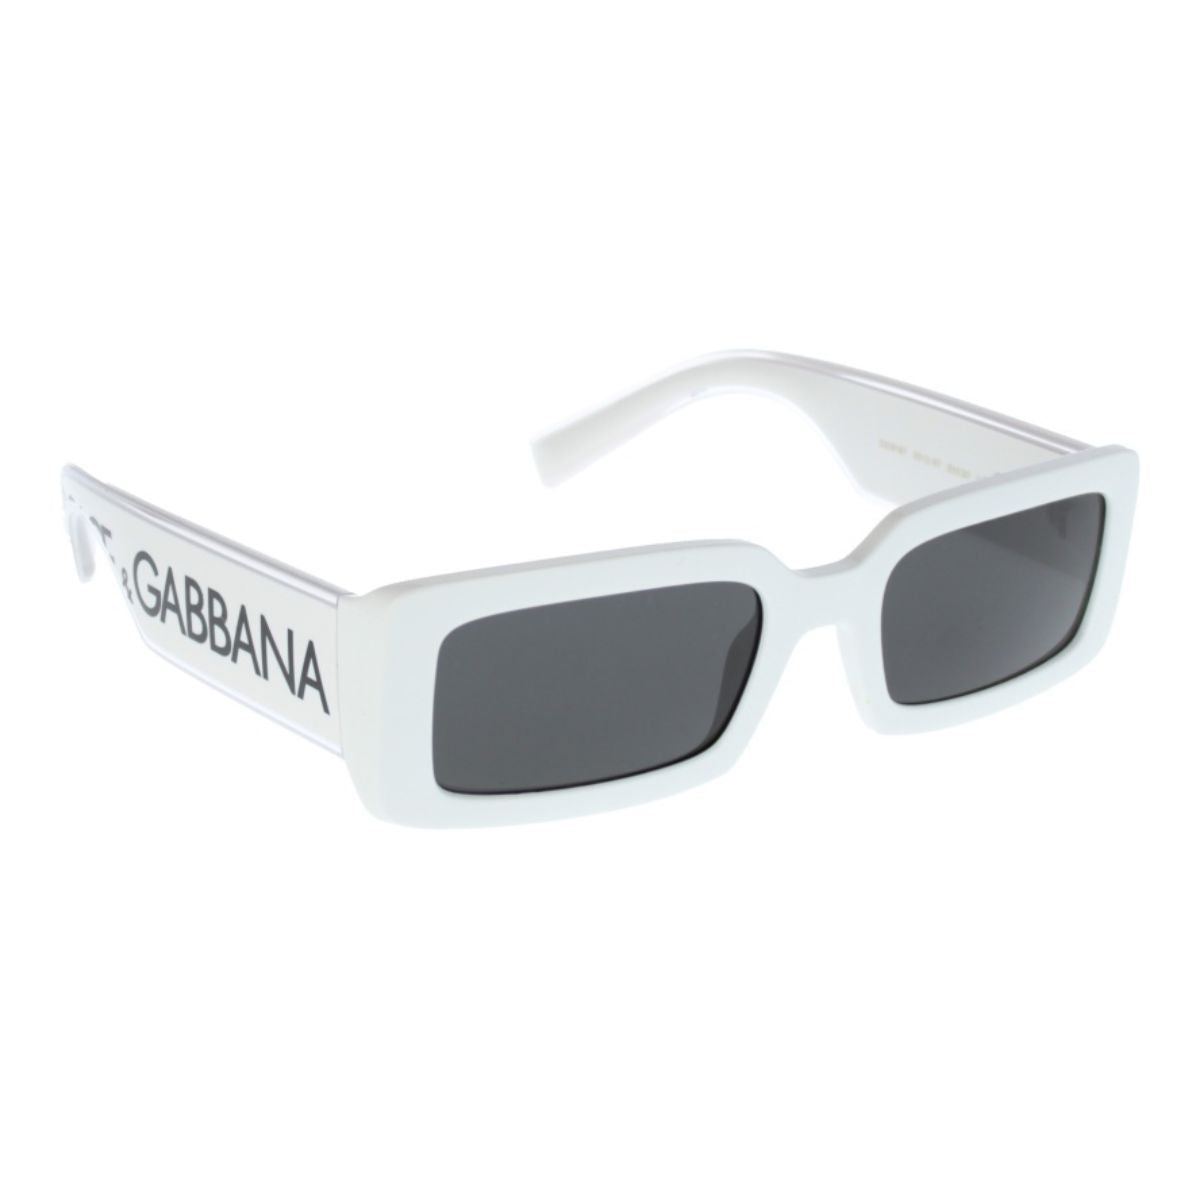 "Dolce & Gabbana DG6187 3312/87 sunglasses: UV protection, white color, perfect for men and women."